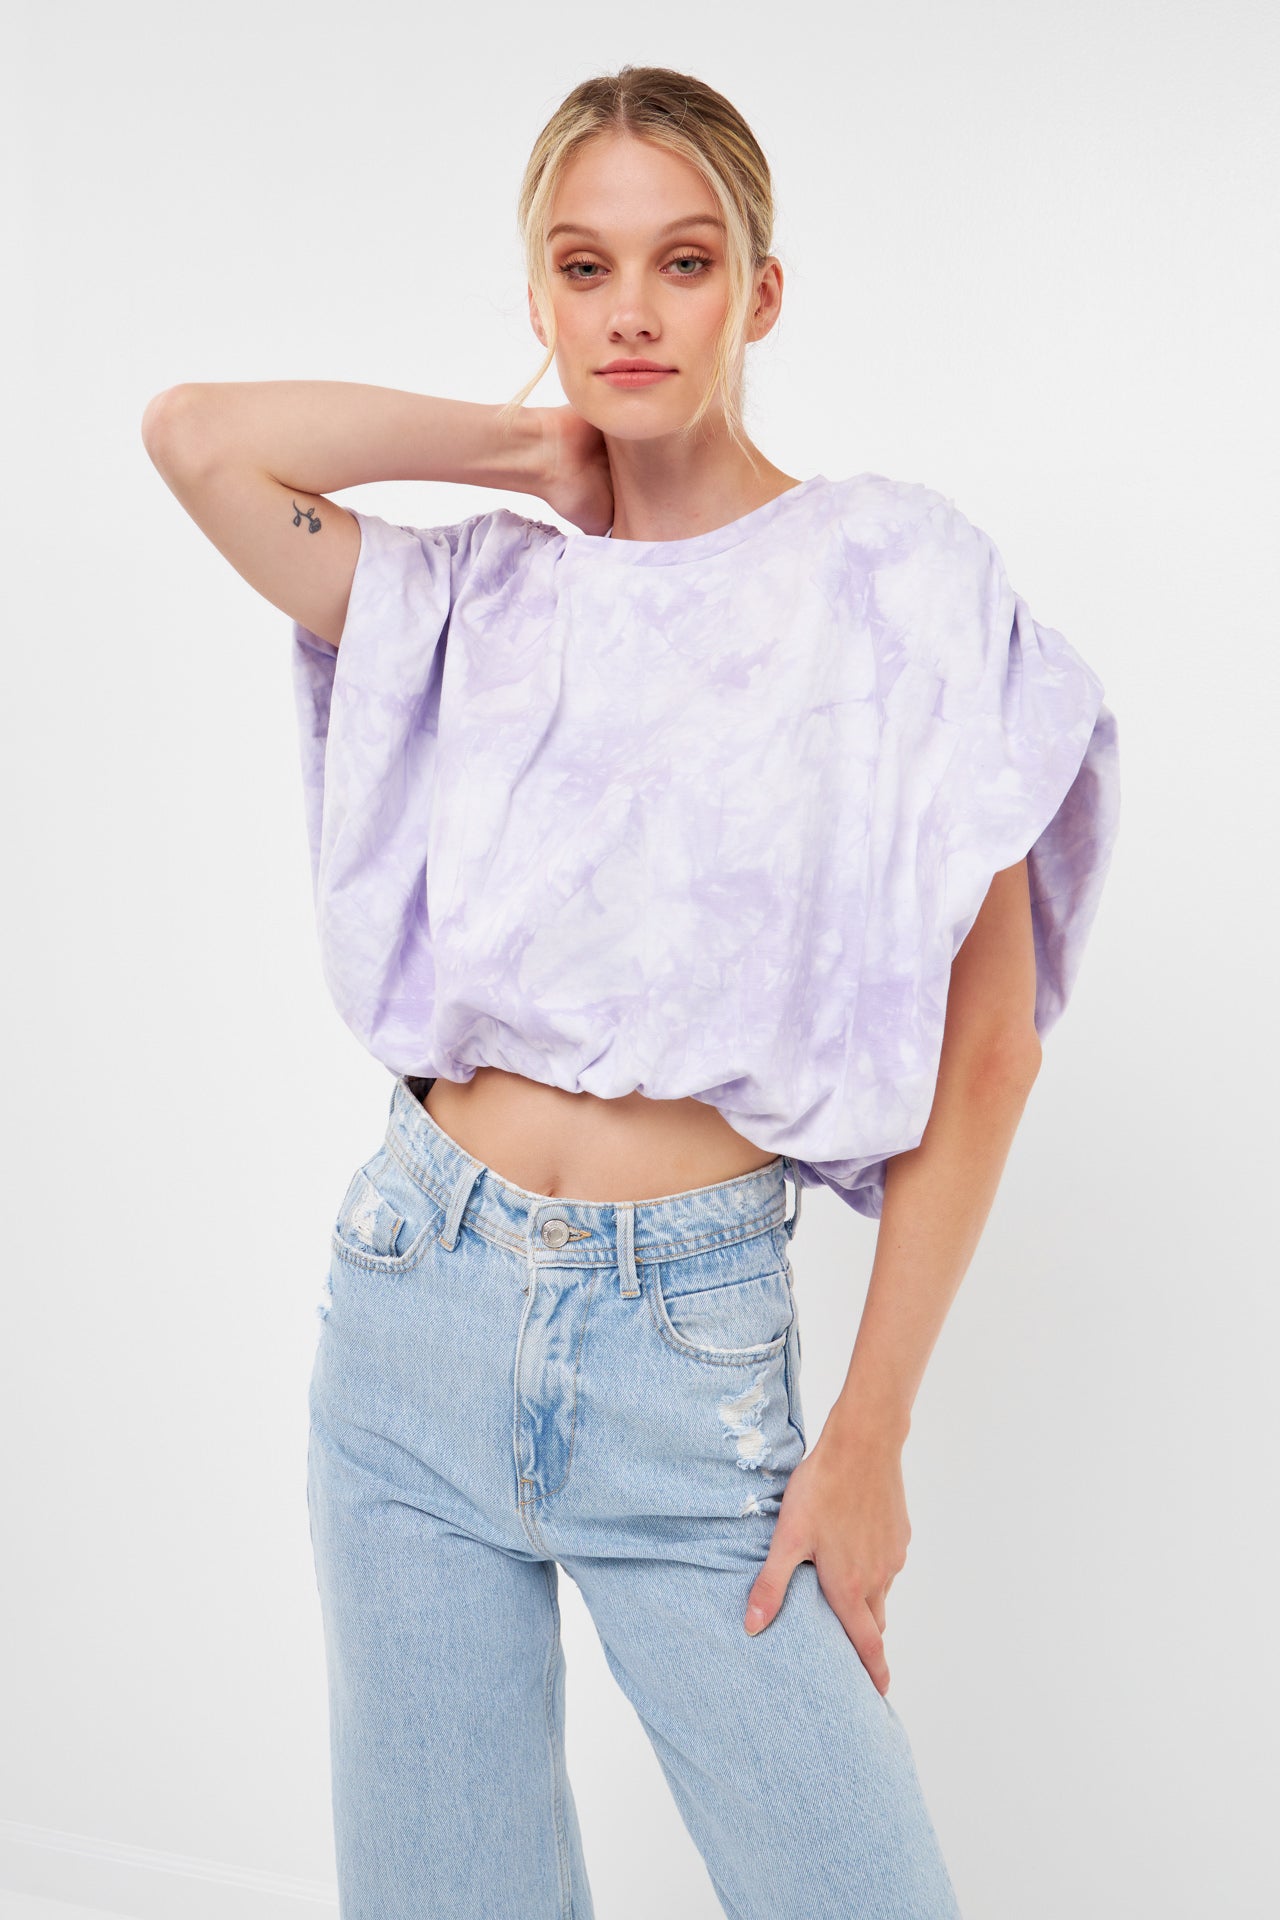 FREE THE ROSES - Tie-Dye Knit Balloon Top - TOPS available at Objectrare